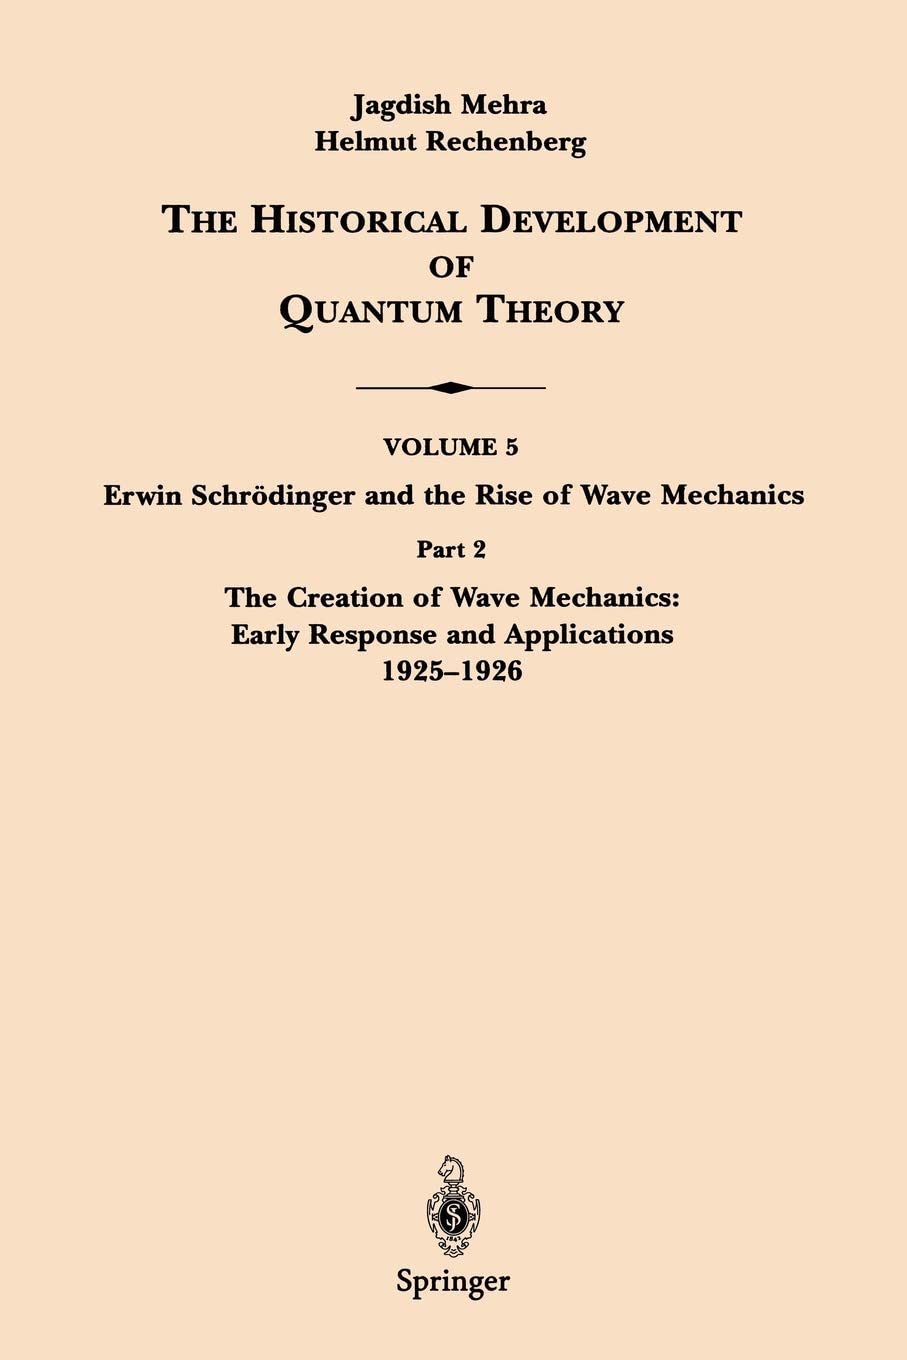 The Historical Development of Quantum Theory : Vol. 5, Part 2